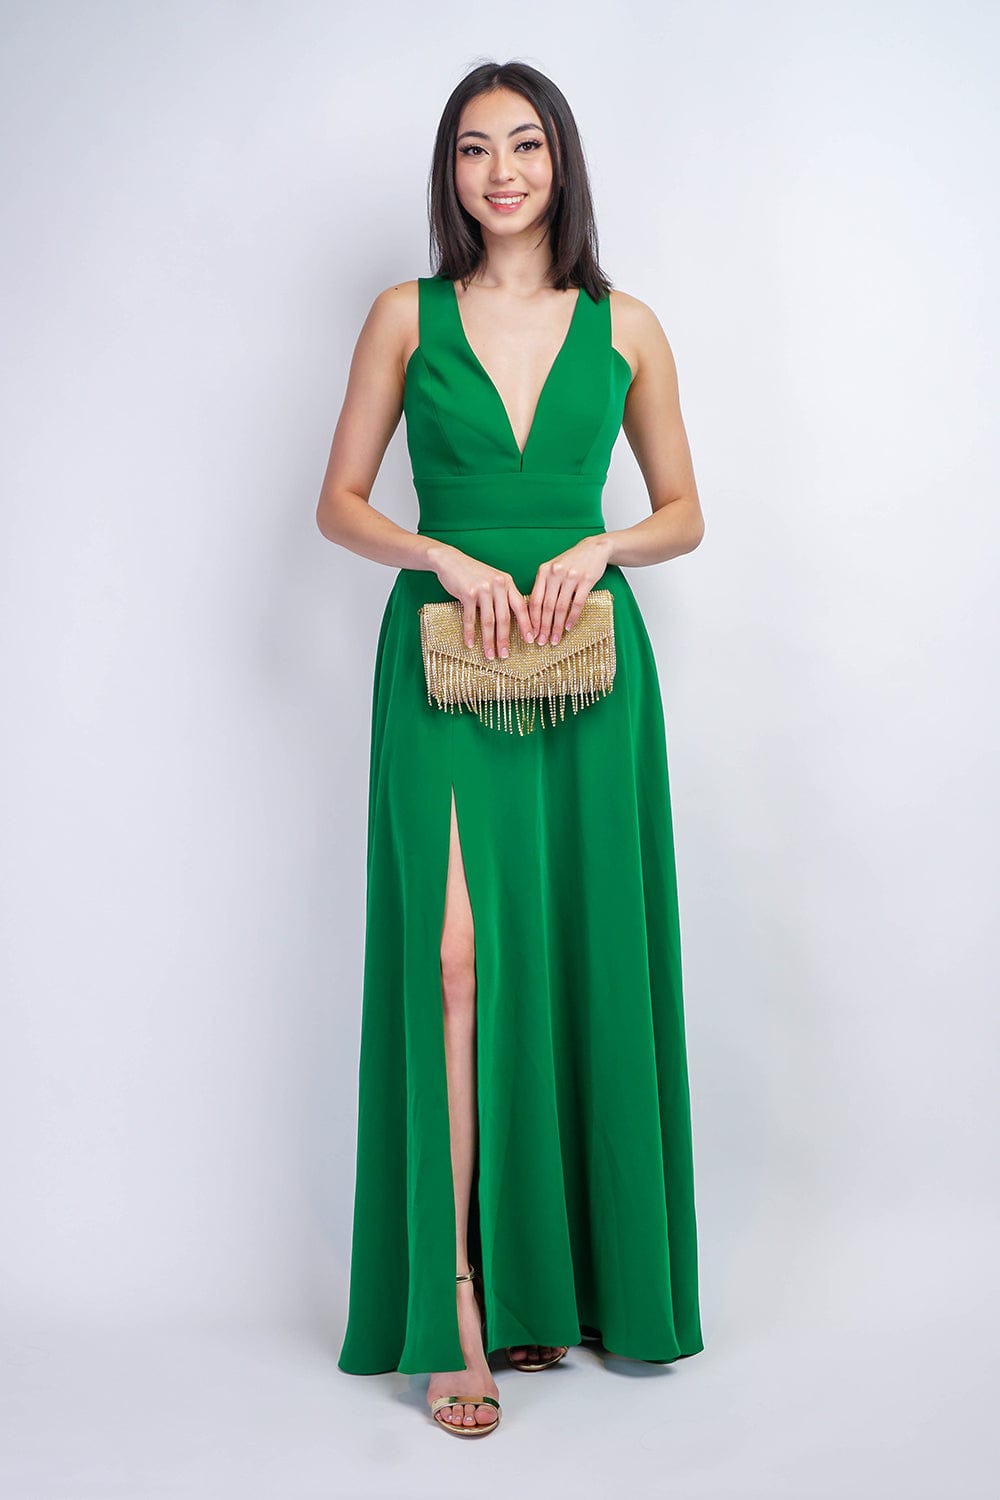 GOWNS Kelly Green V Neck Front Slit Soraya Gown - Chloe Dao